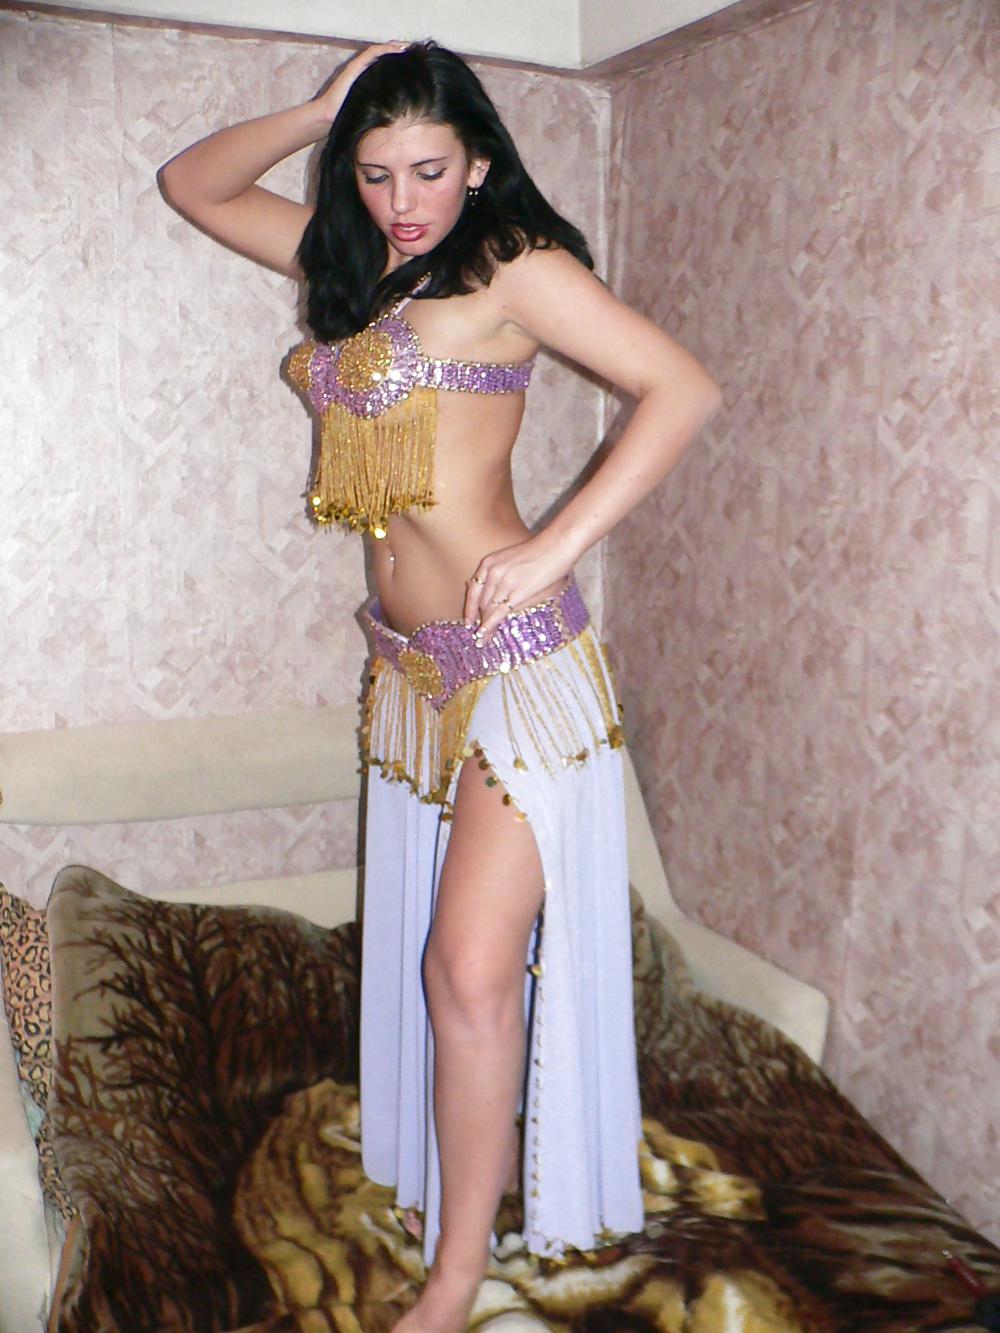 I LOVE BELLY DANCING adult photos